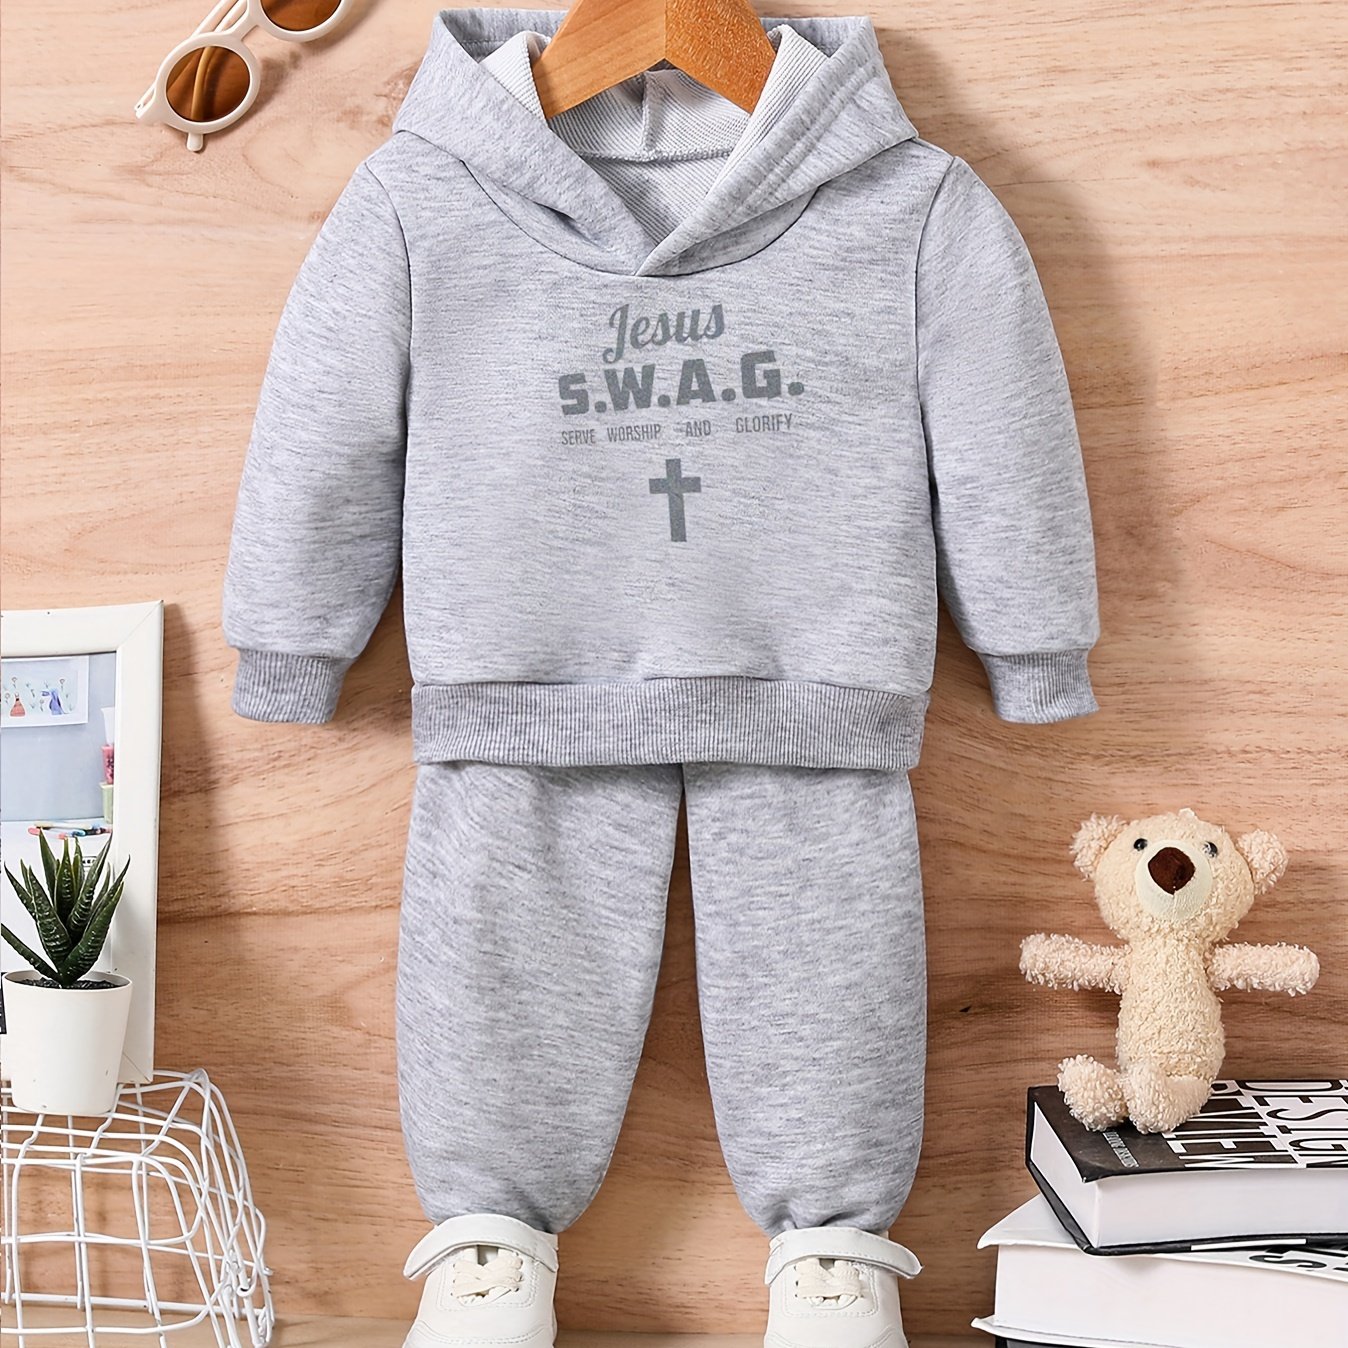 JESUS S.W.A.G Toddler Christian Casual Outfit claimedbygoddesigns